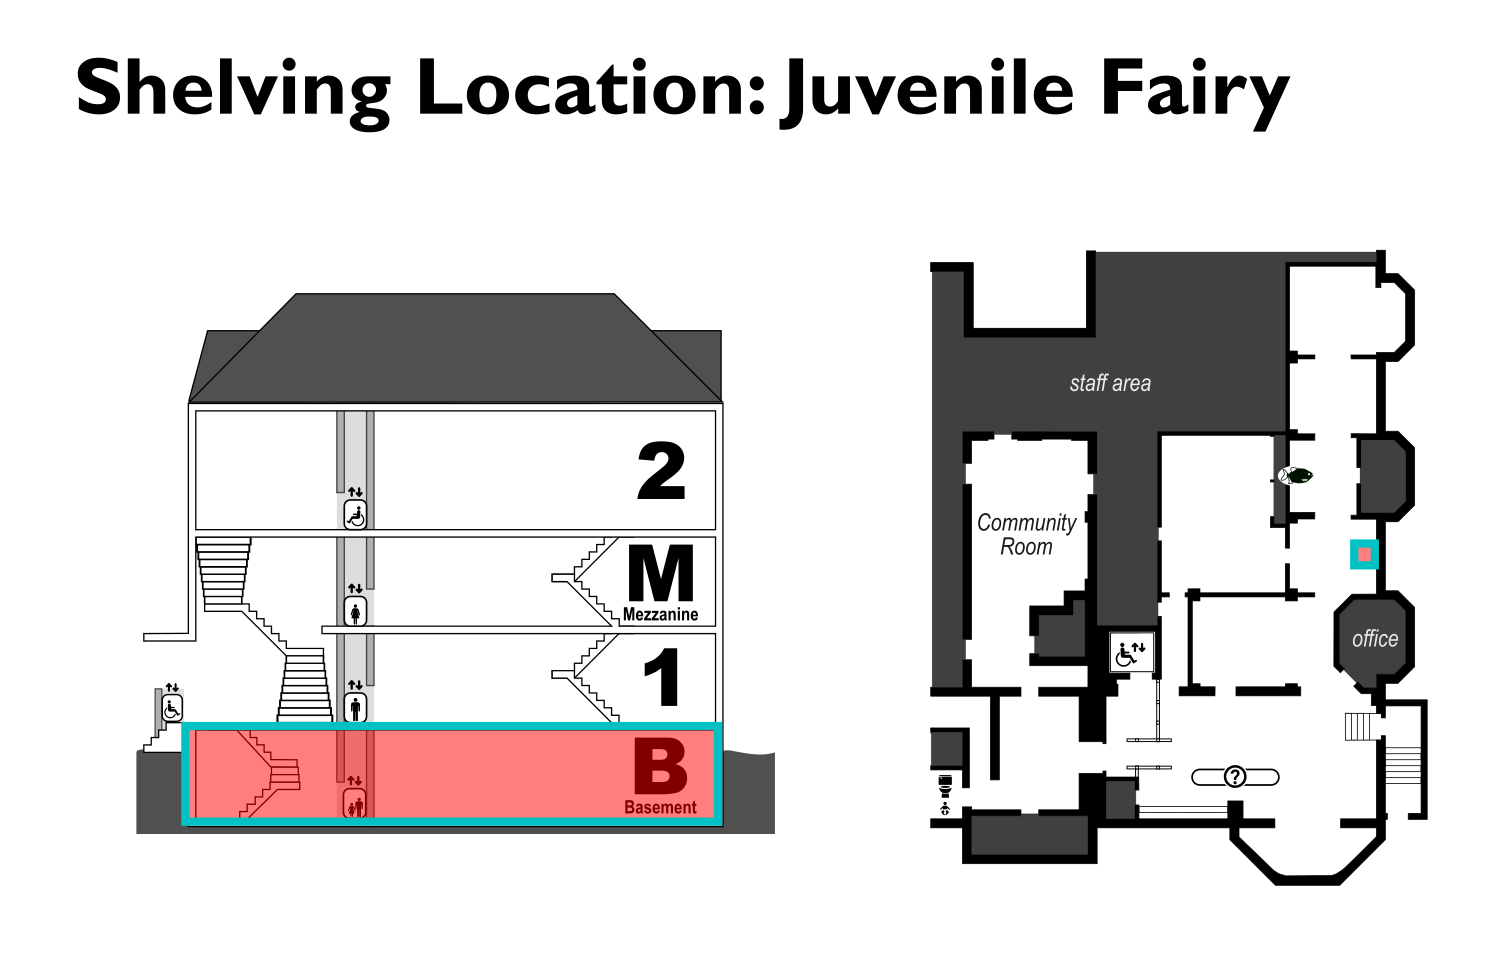 map showing location of the Juvenile Fairy shelving location